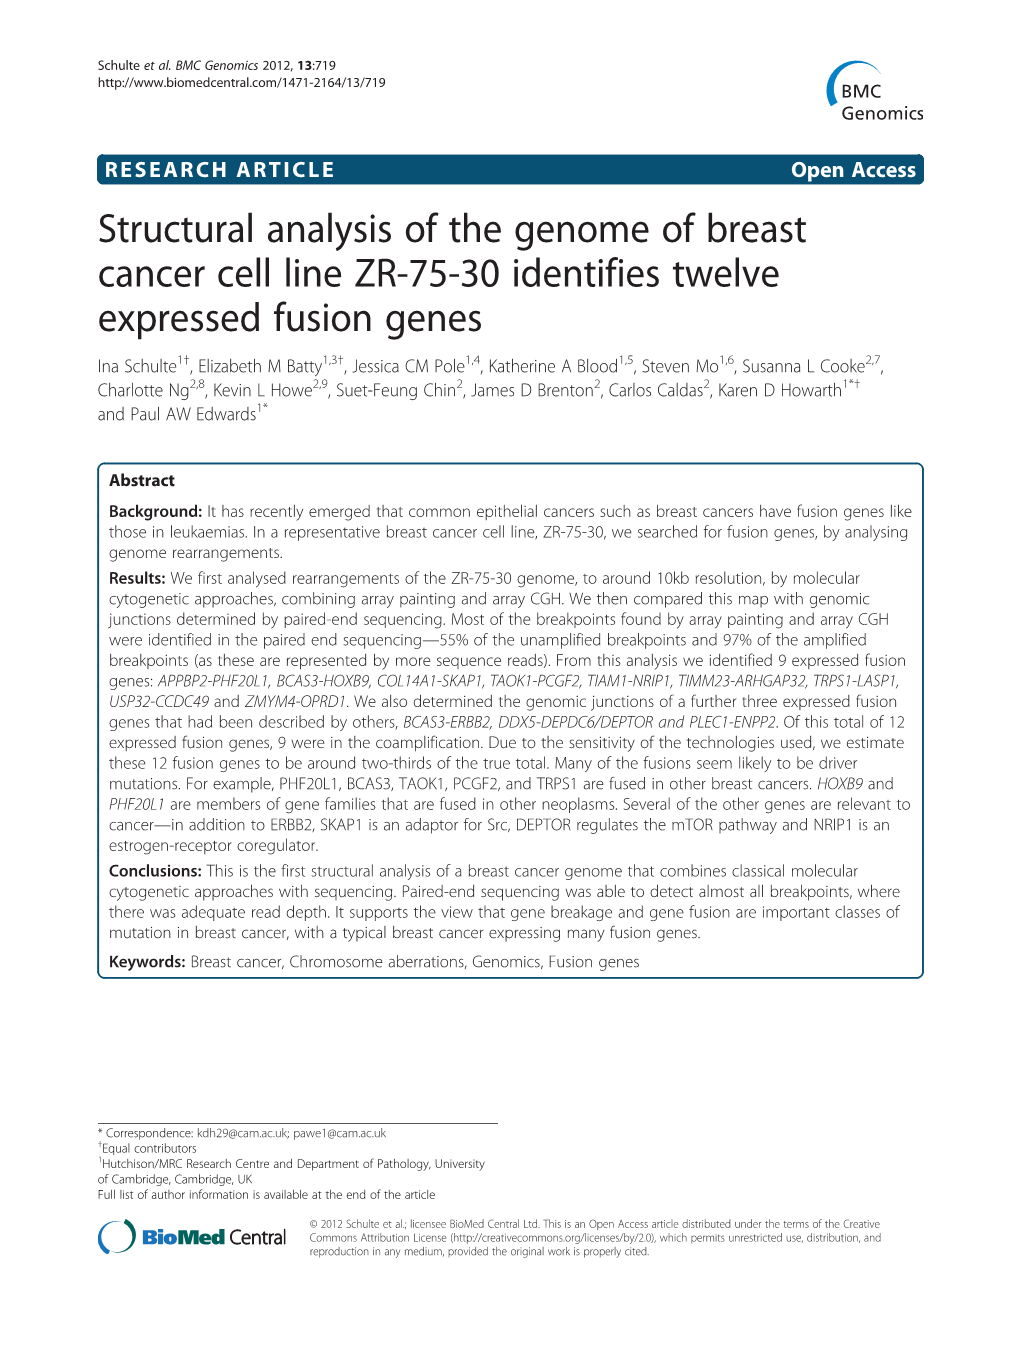 Structural Analysis of the Genome of Breast Cancer Cell Line ZR-75-30